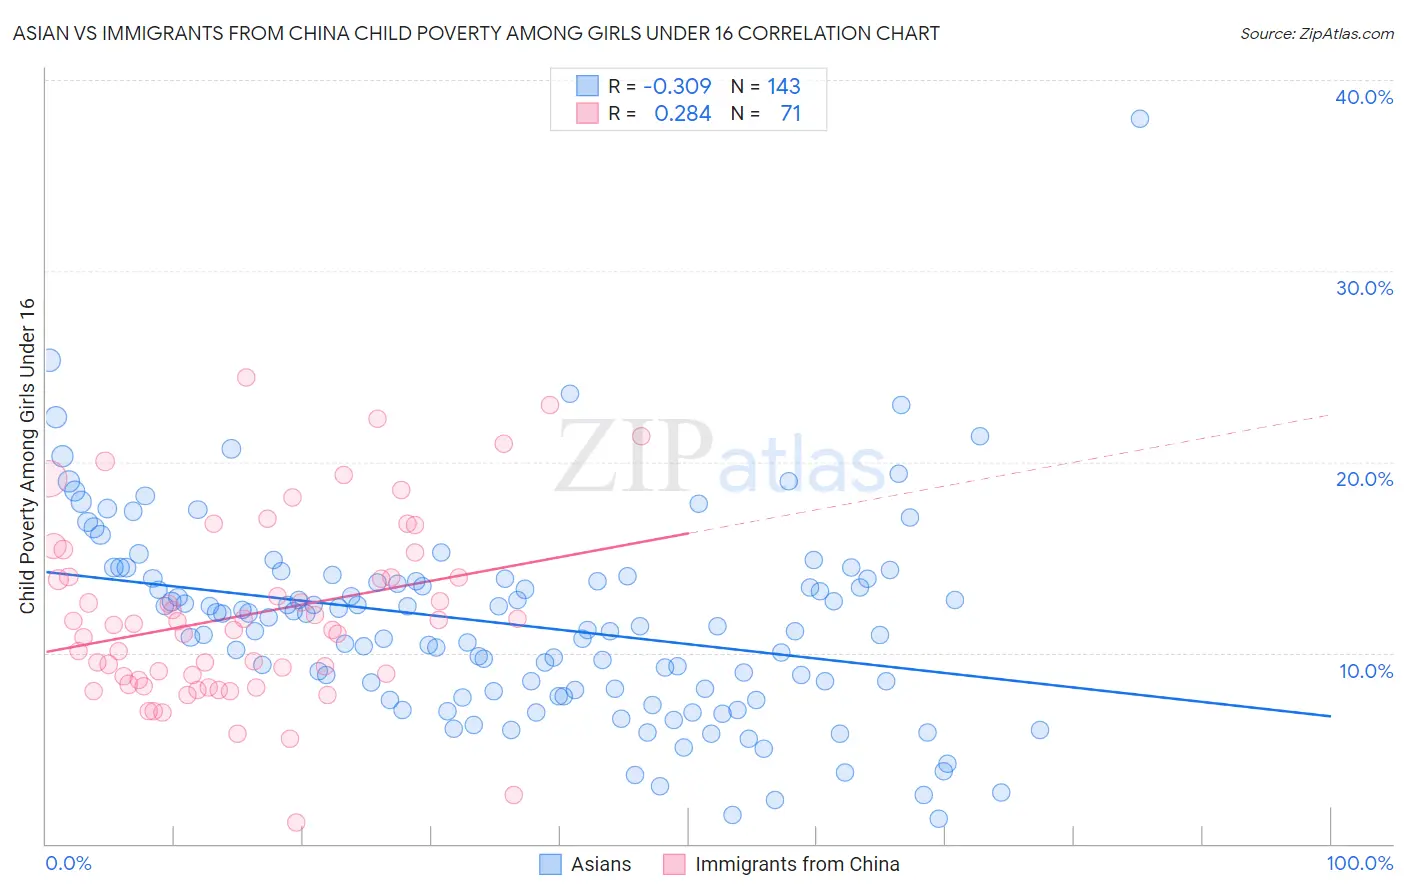 Asian vs Immigrants from China Child Poverty Among Girls Under 16